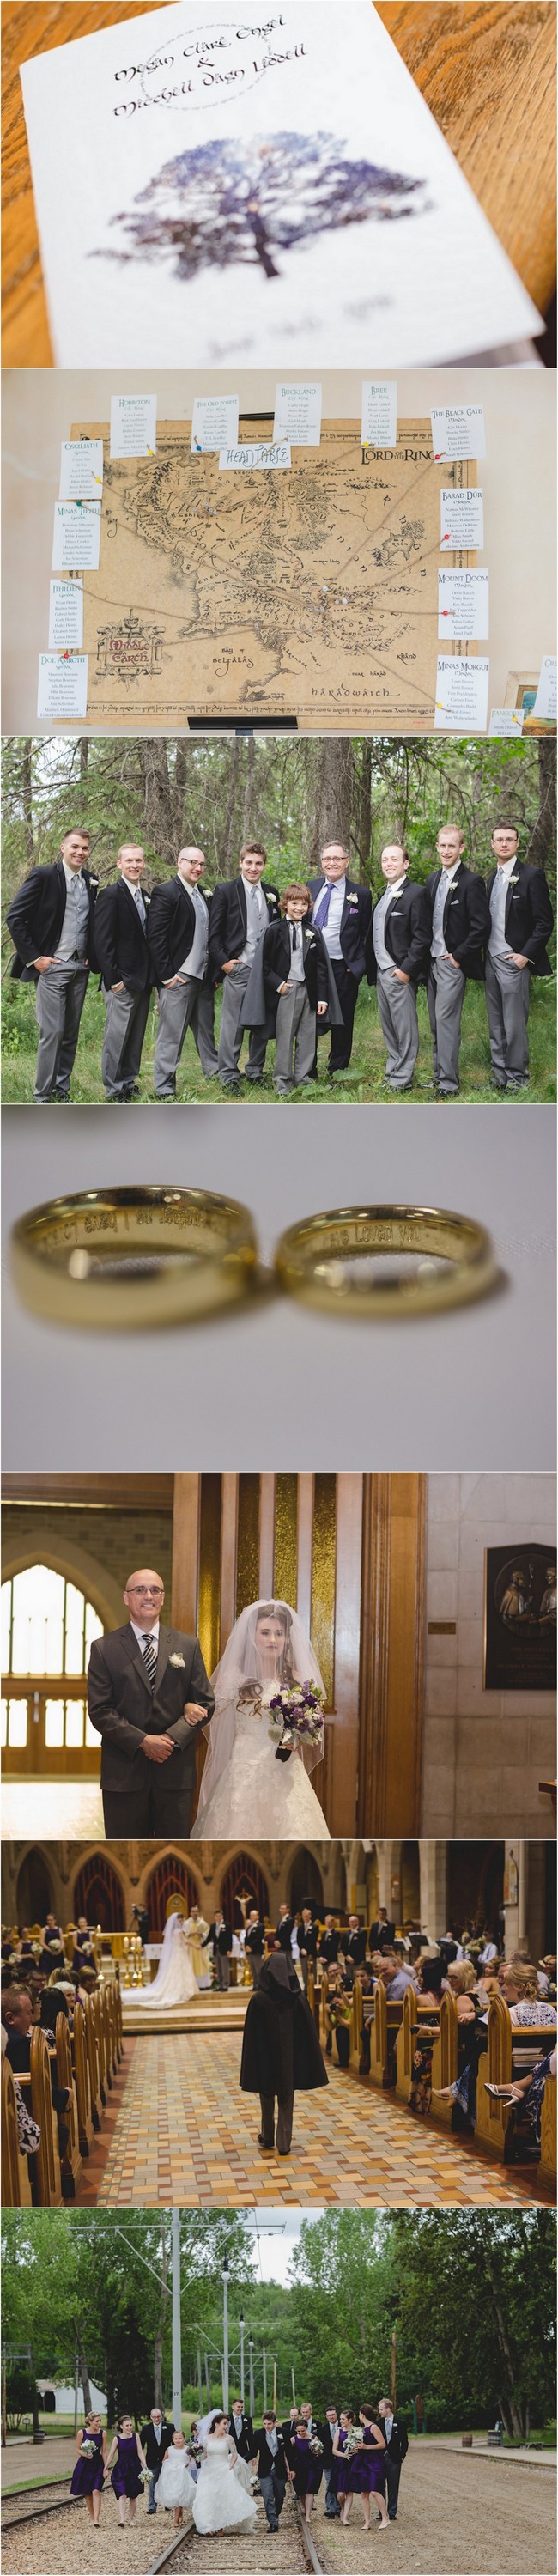 Epic Lord of the Rings Wedding - ENV Photography